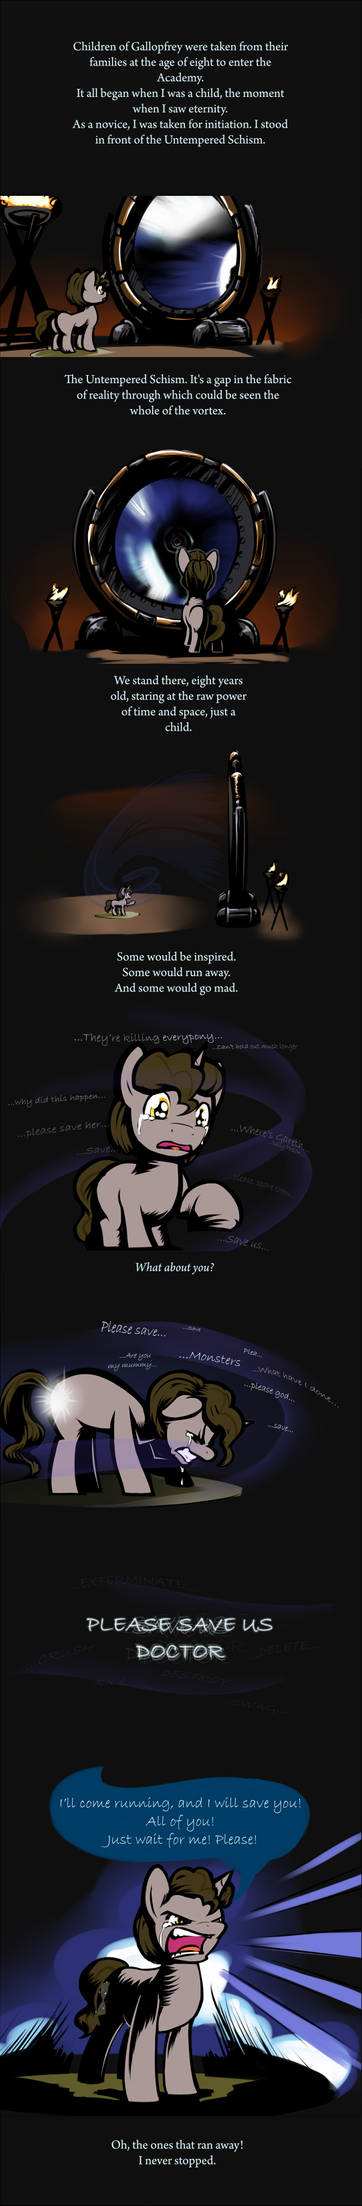 The One That Ran Away (Doctor Whooves)